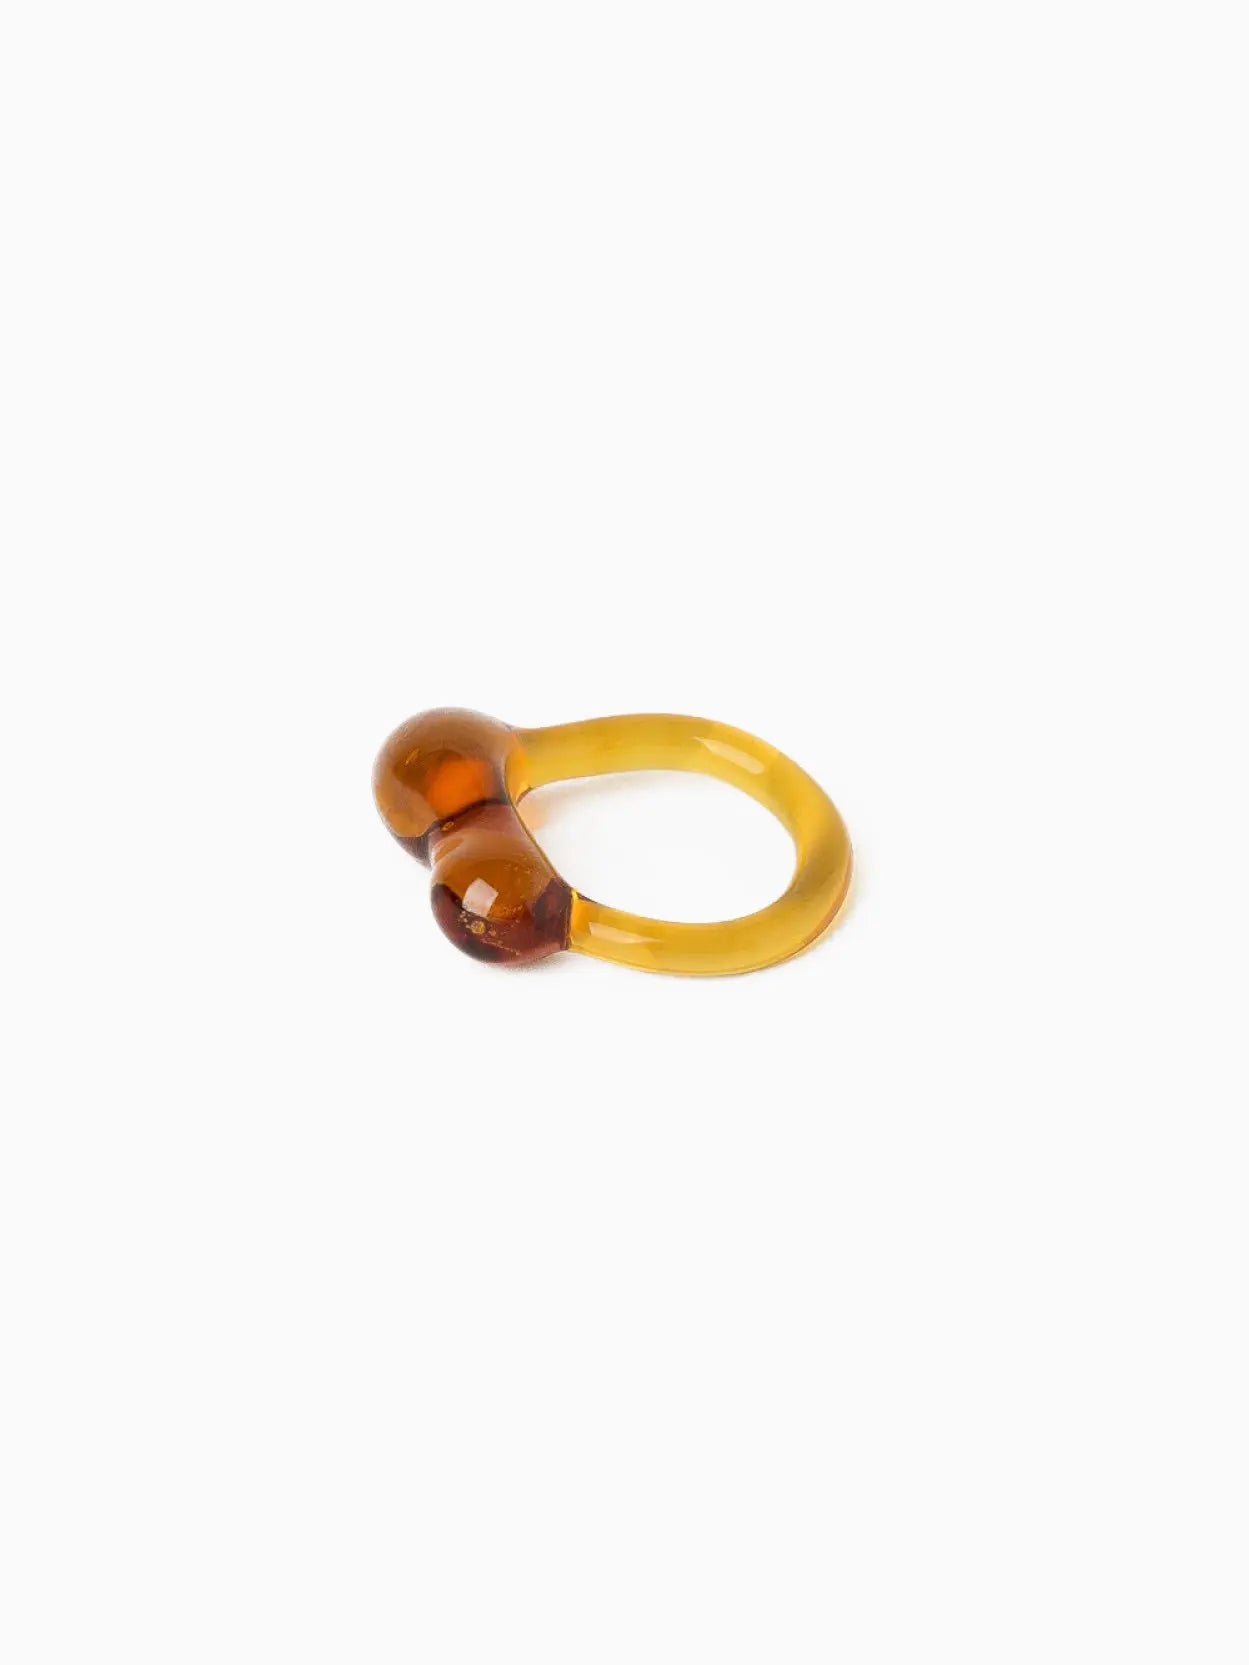 A minimalist, amber-colored Caju Ring Amber made of translucent resin by Nathalie Schreckenberg available at Bassalstore. The ring features two bulbous ends positioned opposite each other on the band. The simple yet elegant design gives the ring a modern and unique appearance. The background is plain white, reflecting its chic Barcelona roots.